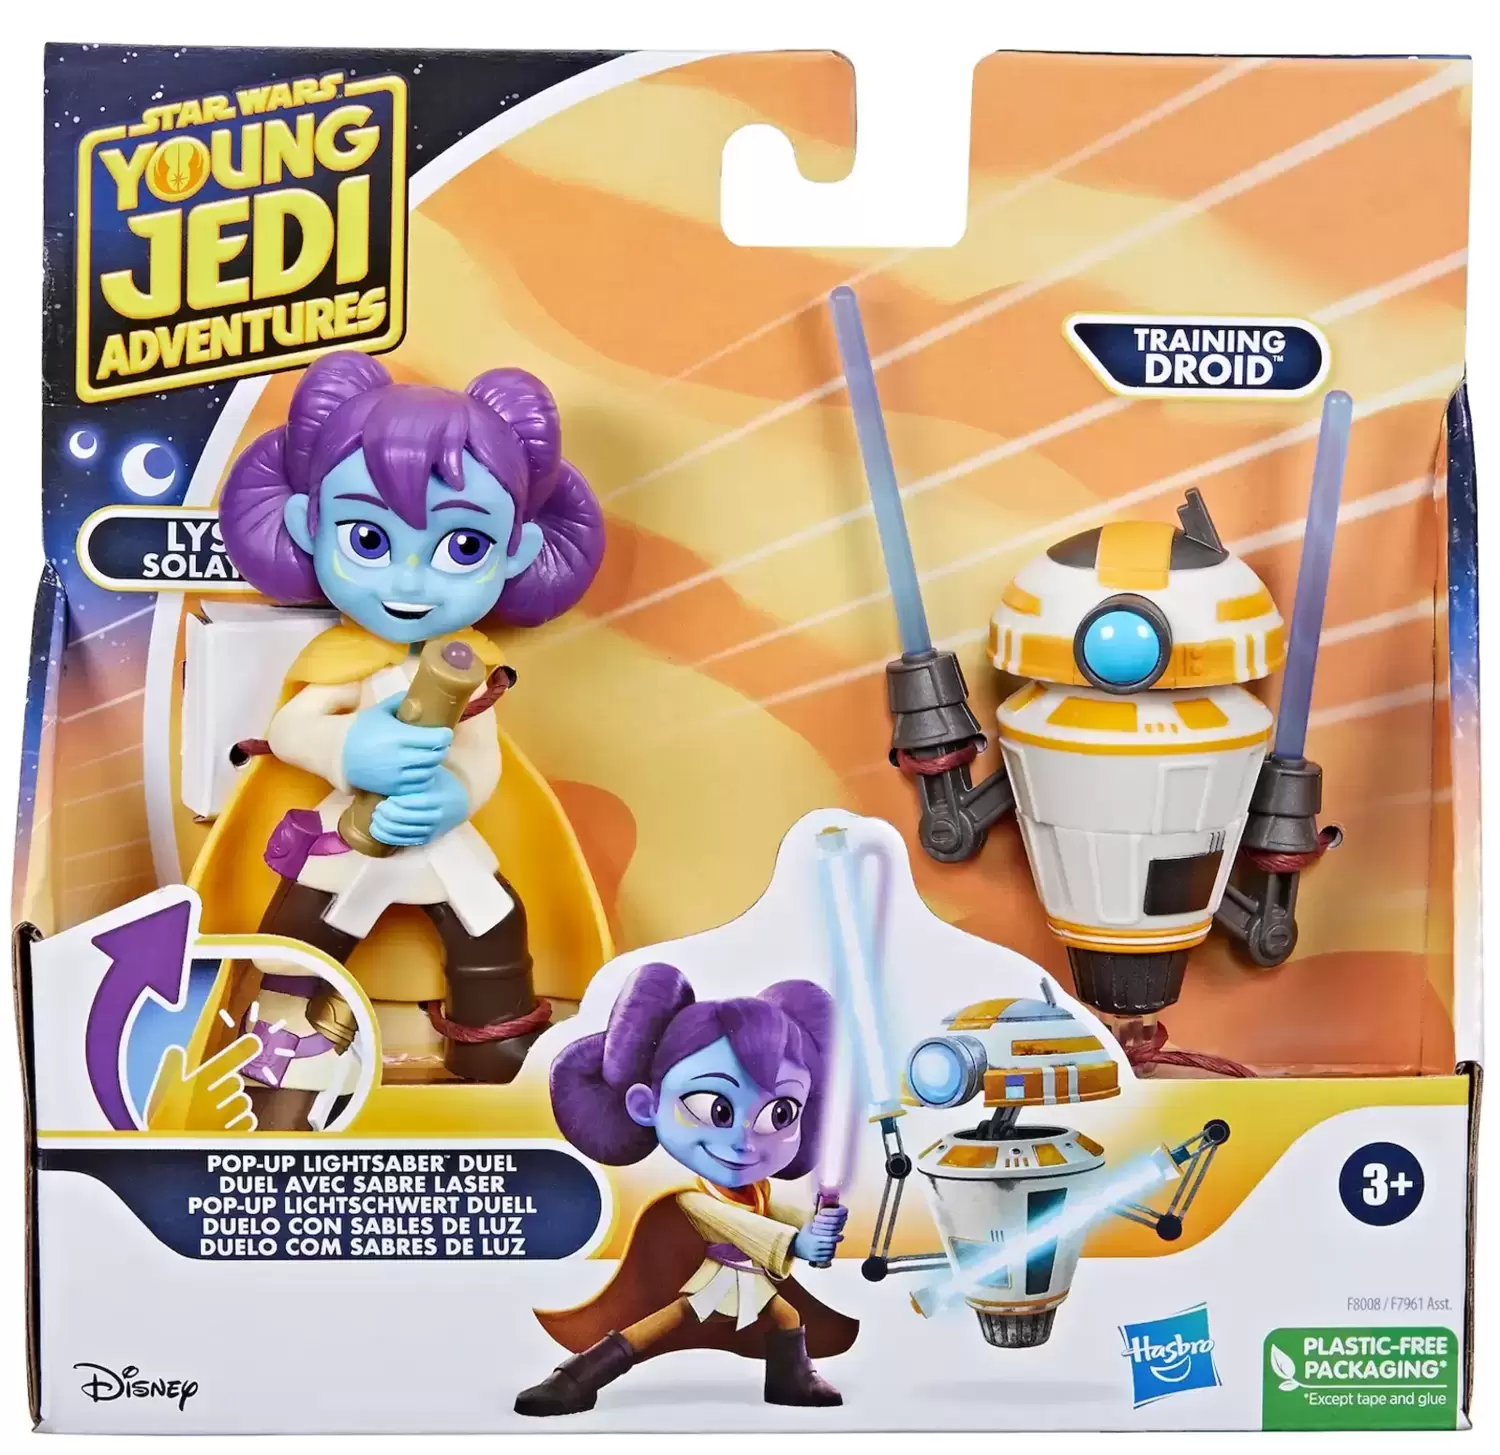 Young Jedi Adventures - Lys Solai and Training Droid - Pop-Up Lightsaber Duel